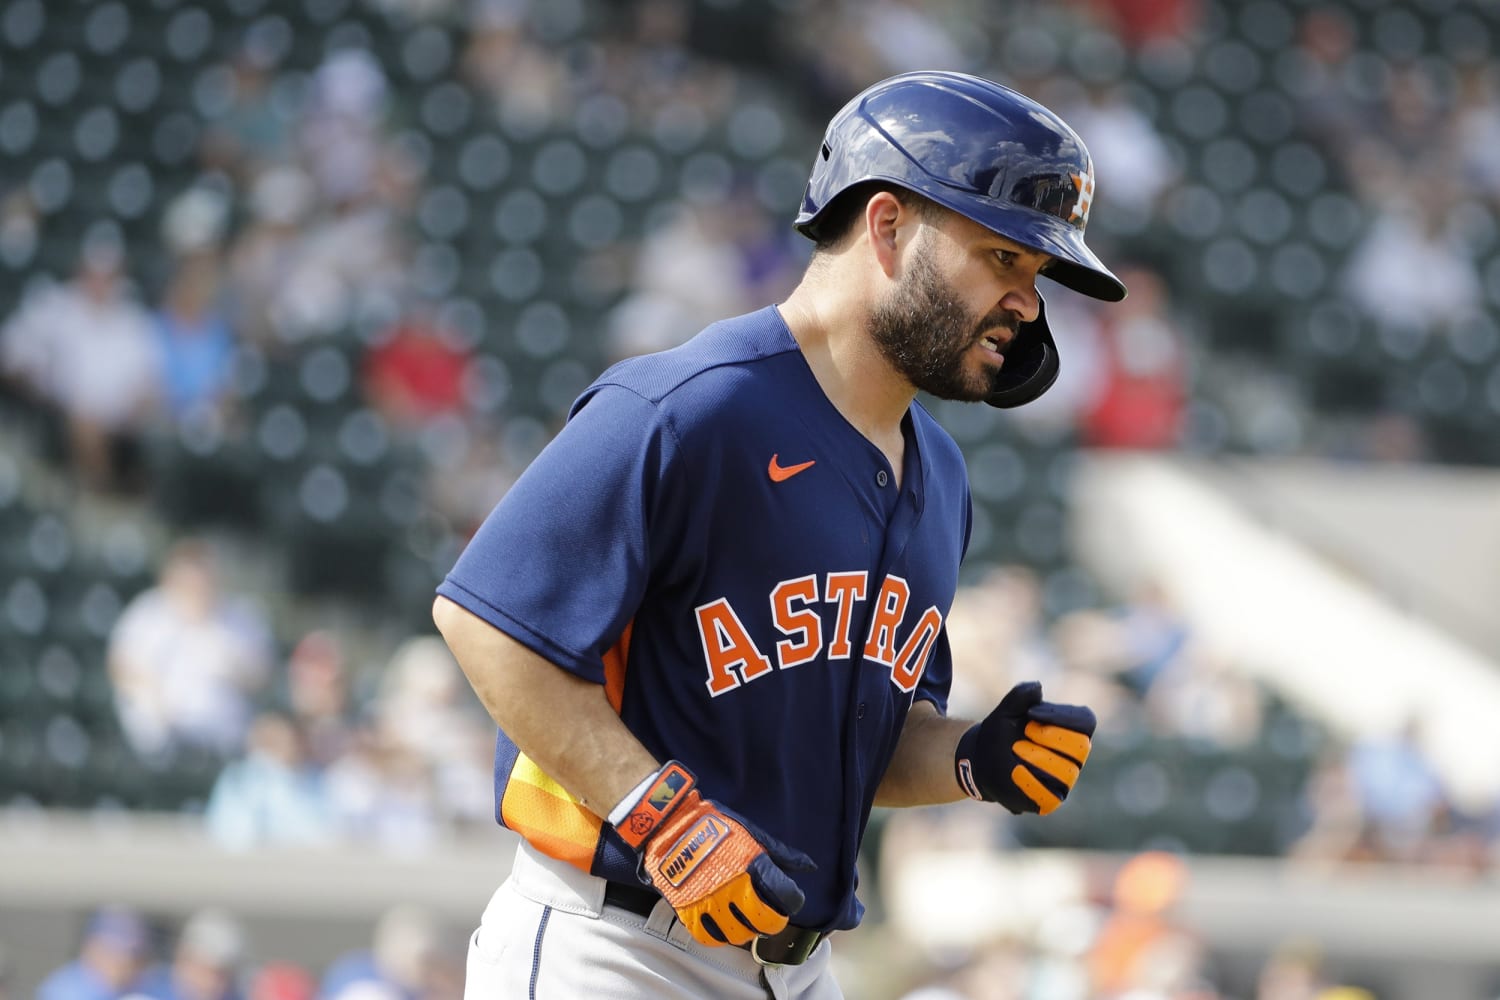 Houston Astros, caught cheating, are hit by errant pitches